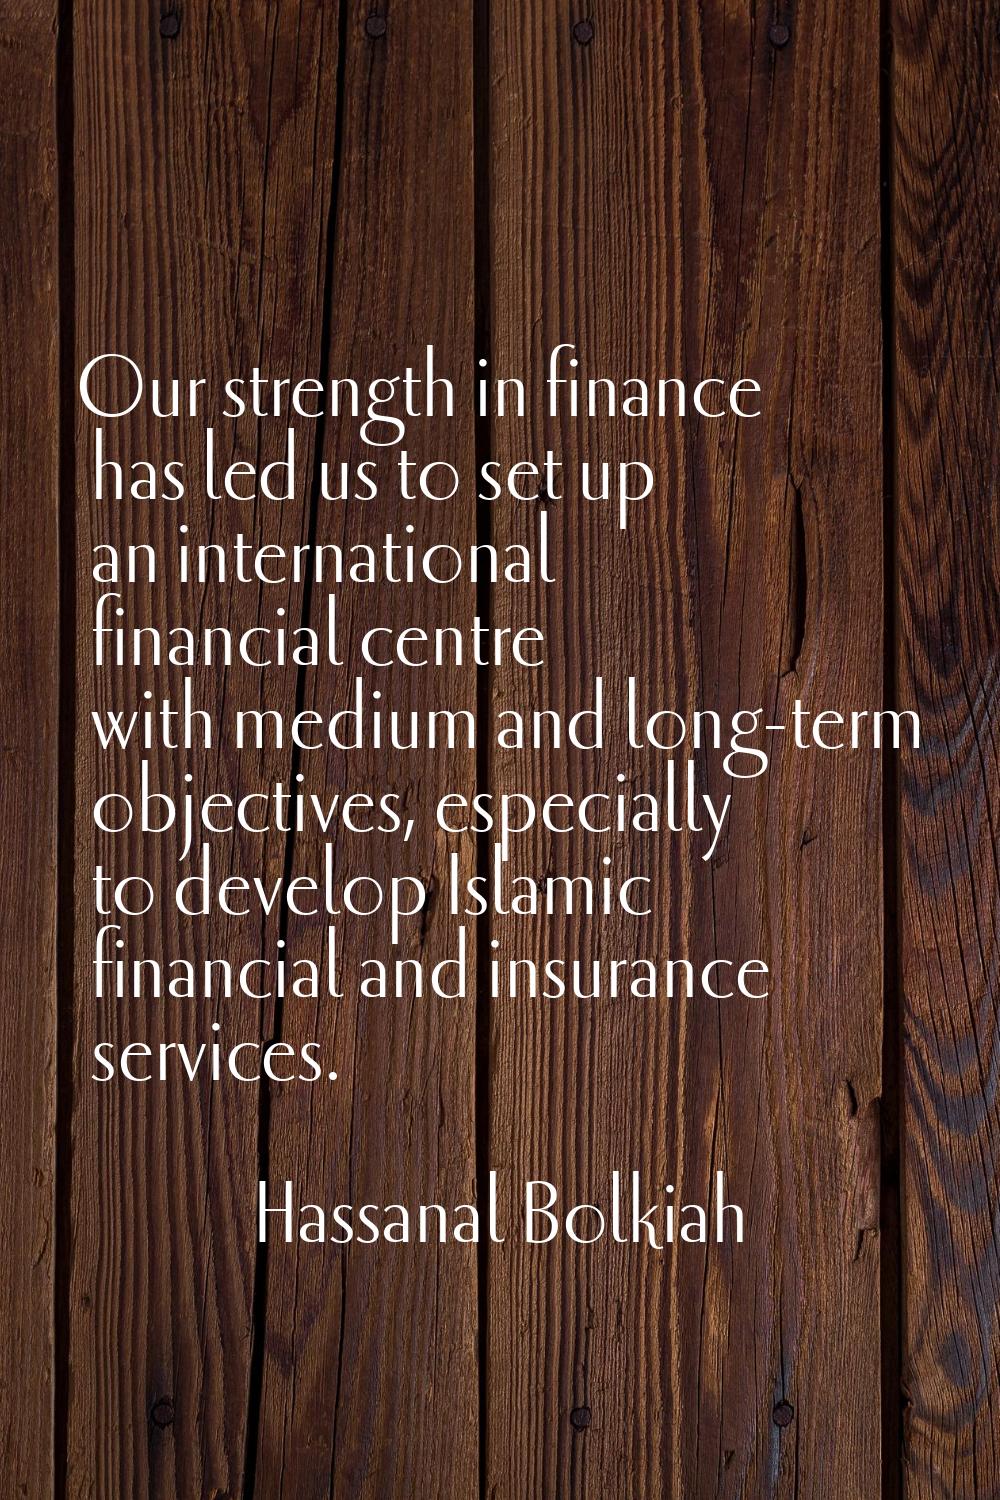 Our strength in finance has led us to set up an international financial centre with medium and long